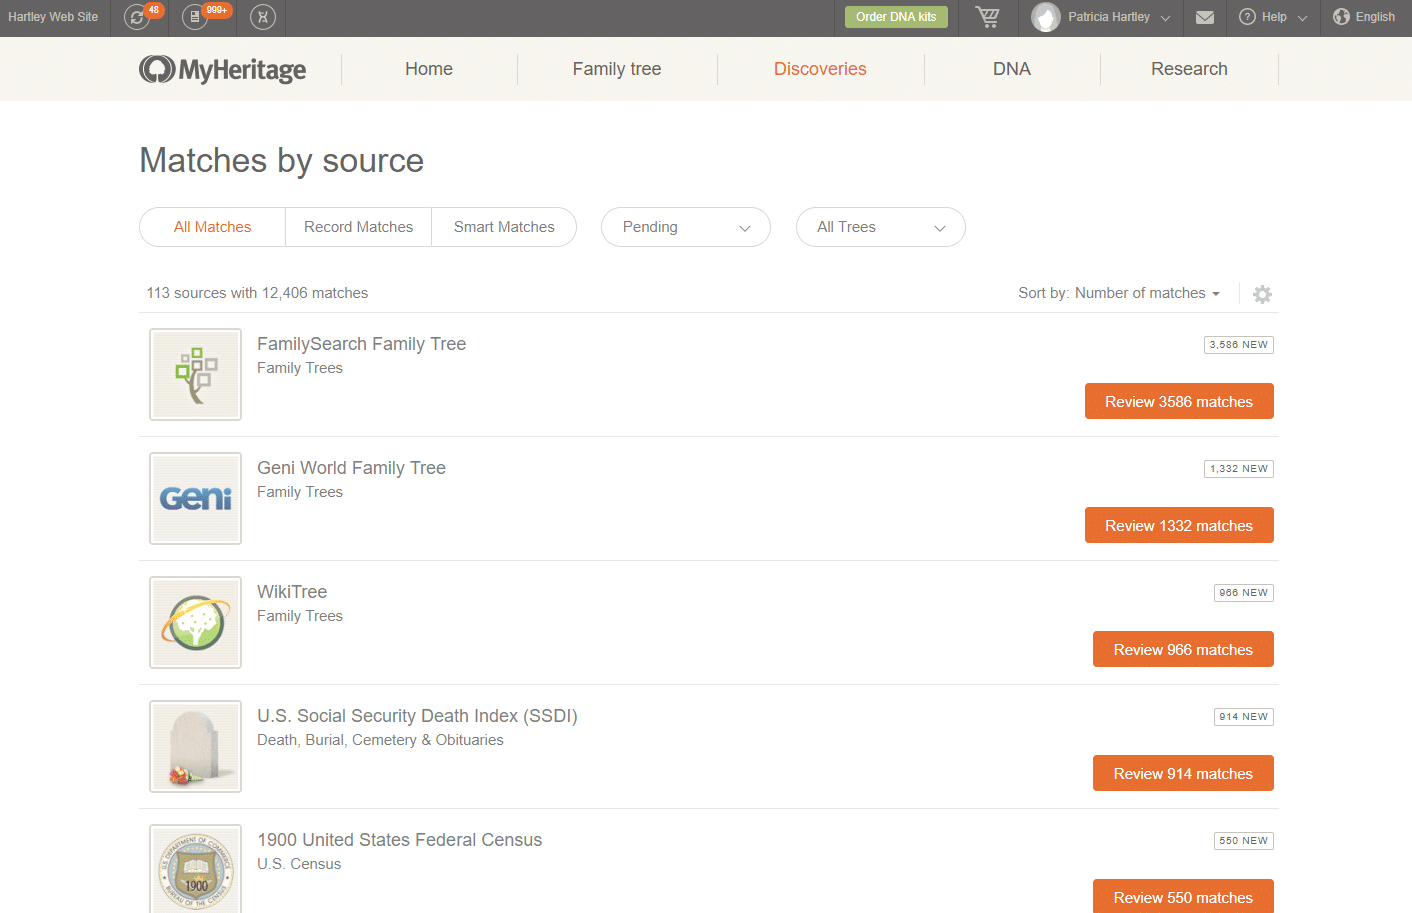 MyHeritage Discoveries Sorted by Sources